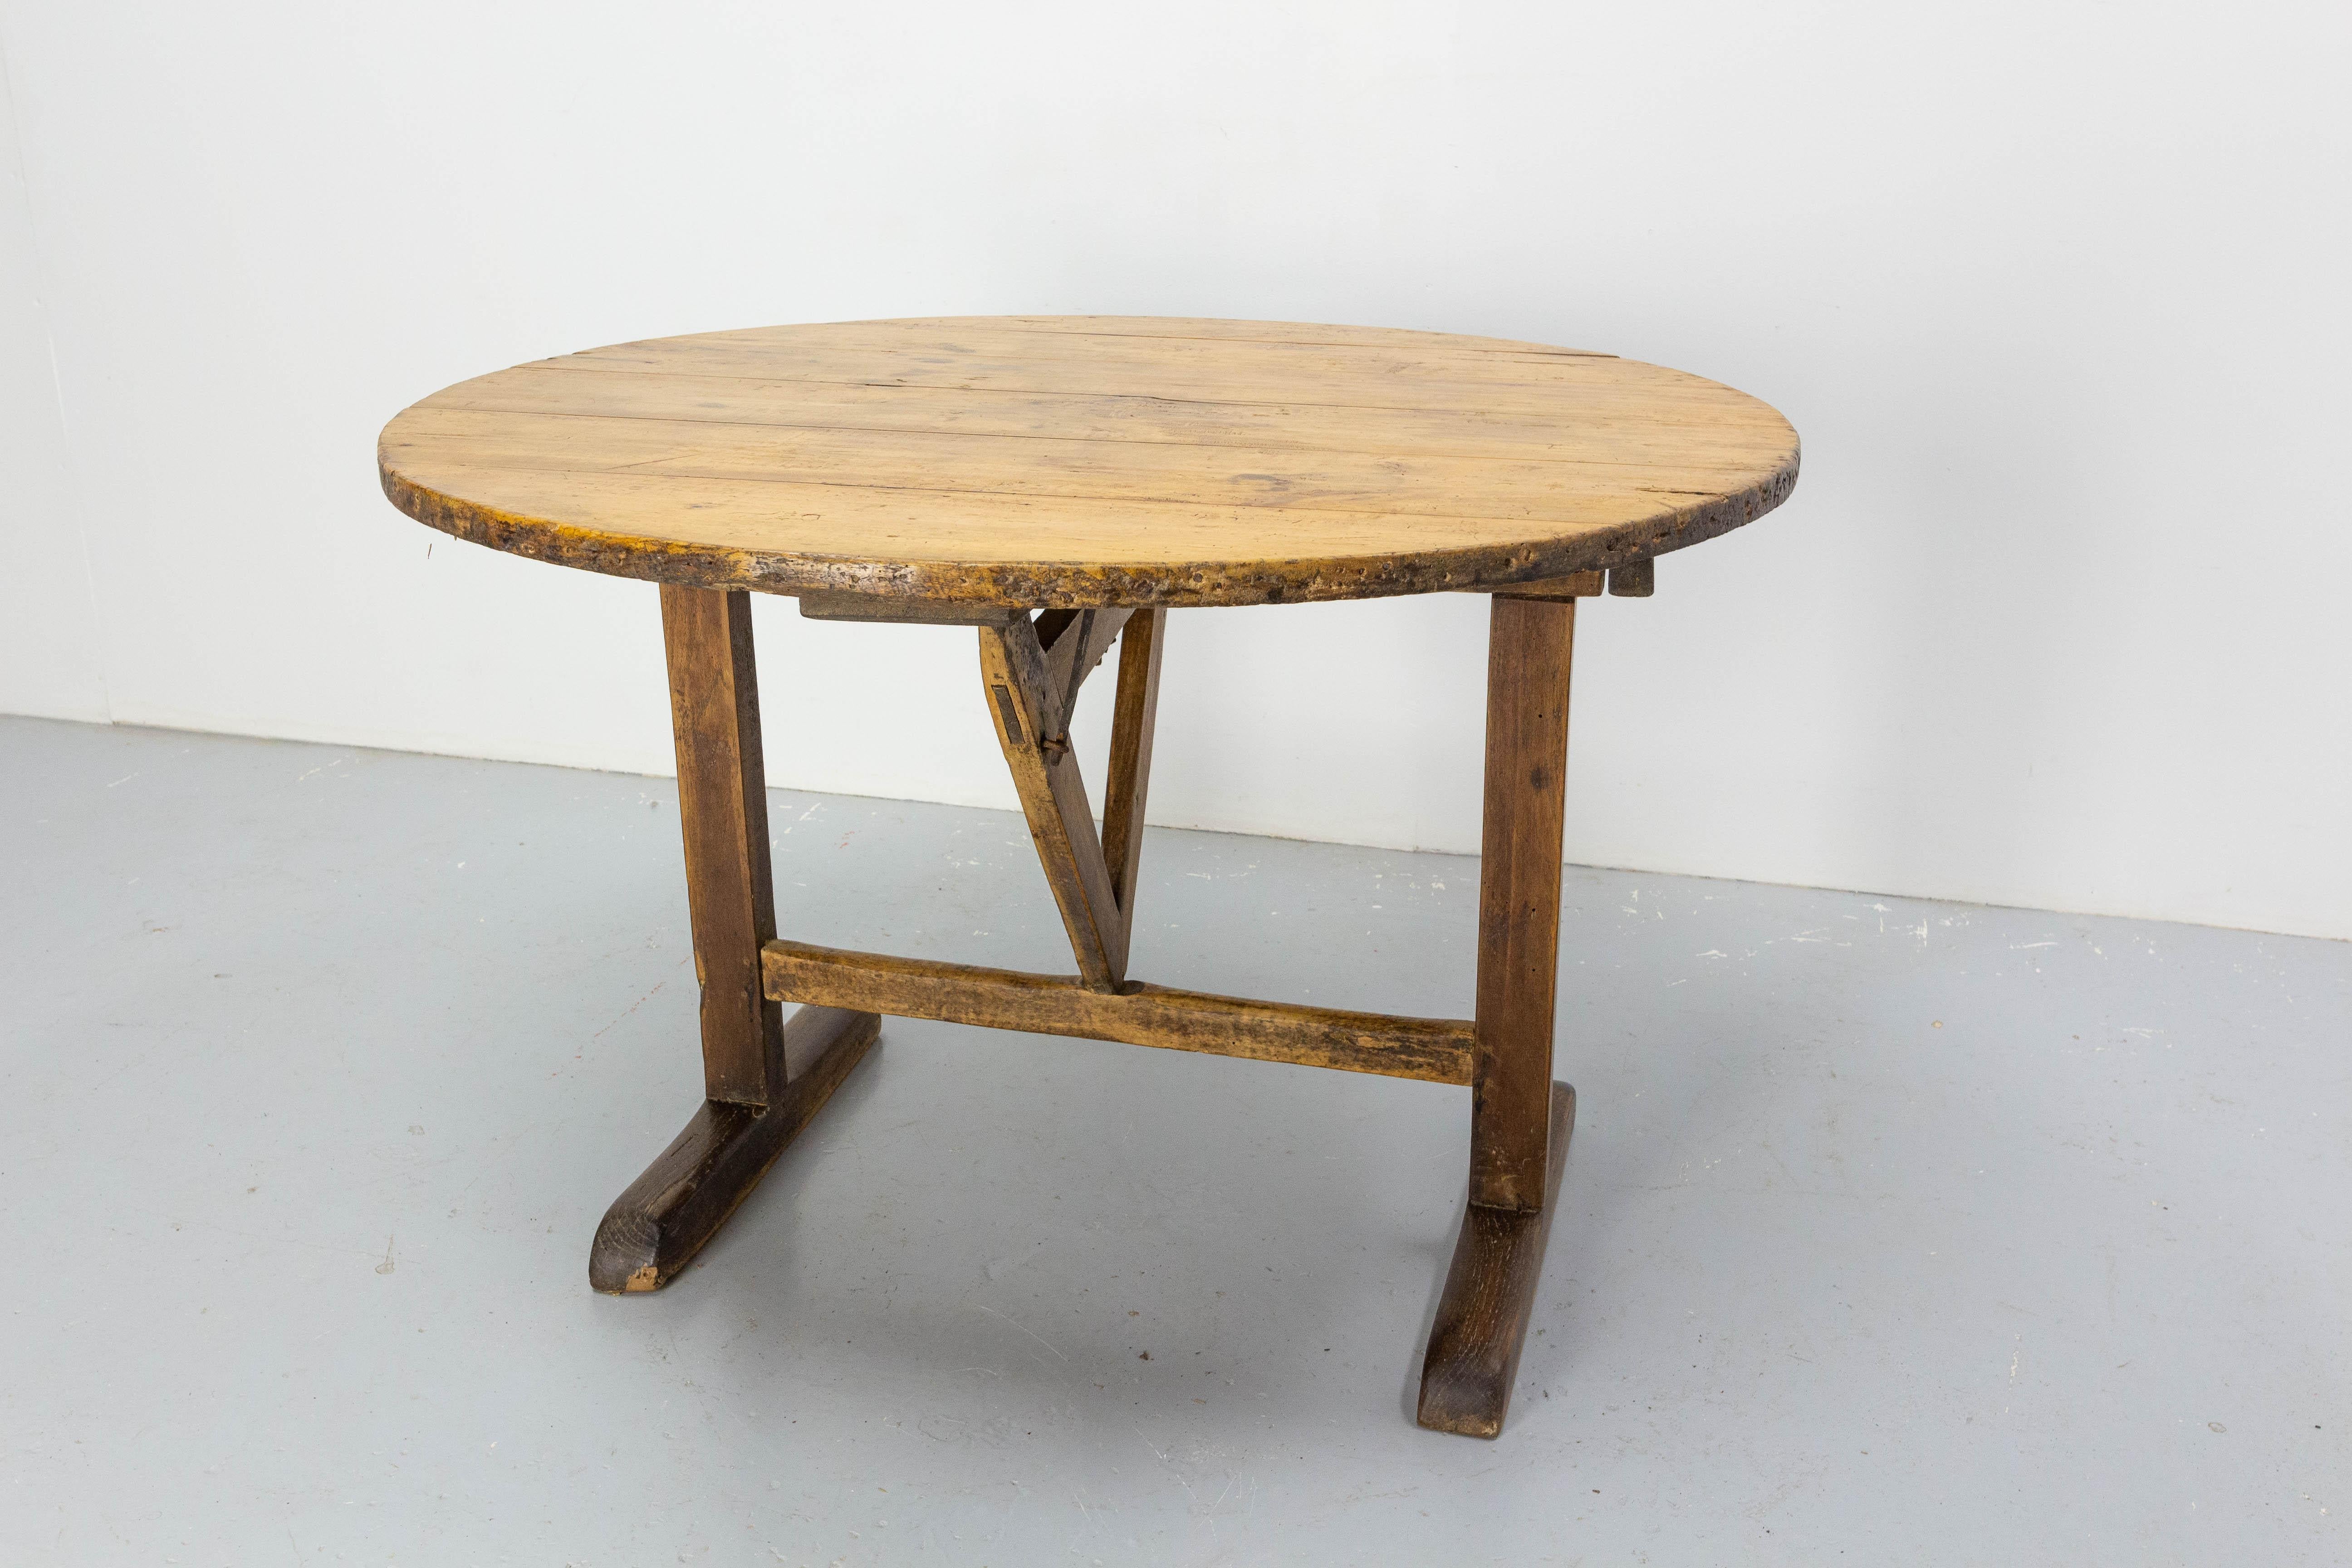 French Foldable Oak & Poplar Table Called Winemaker's Table, 19th Century For Sale 1